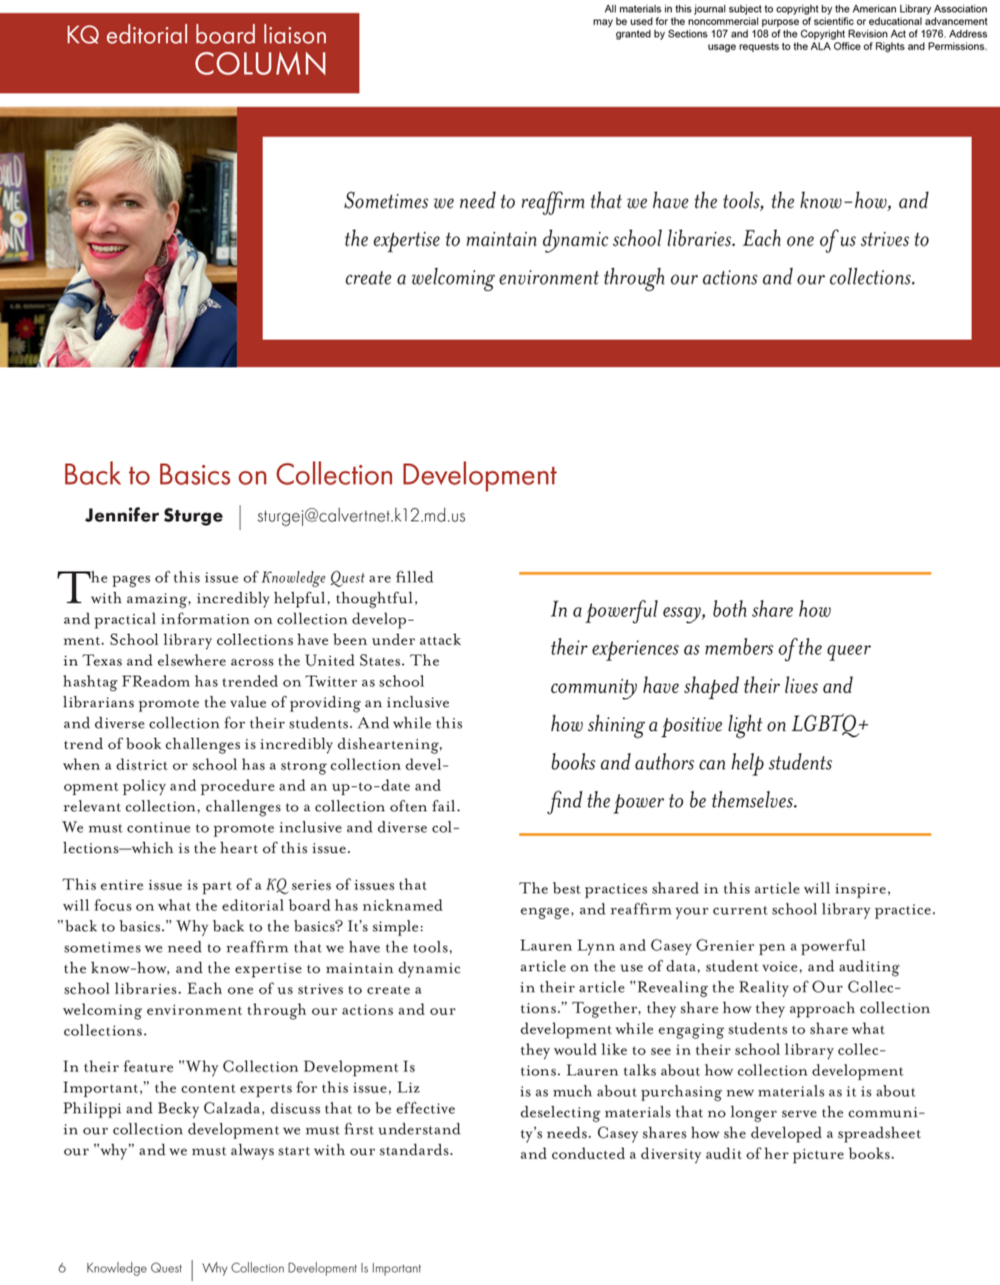 KQ Editorial Board Liaison Column: Back to Basics on Collection Development (Volume 50, No.4, pgs 6-7)